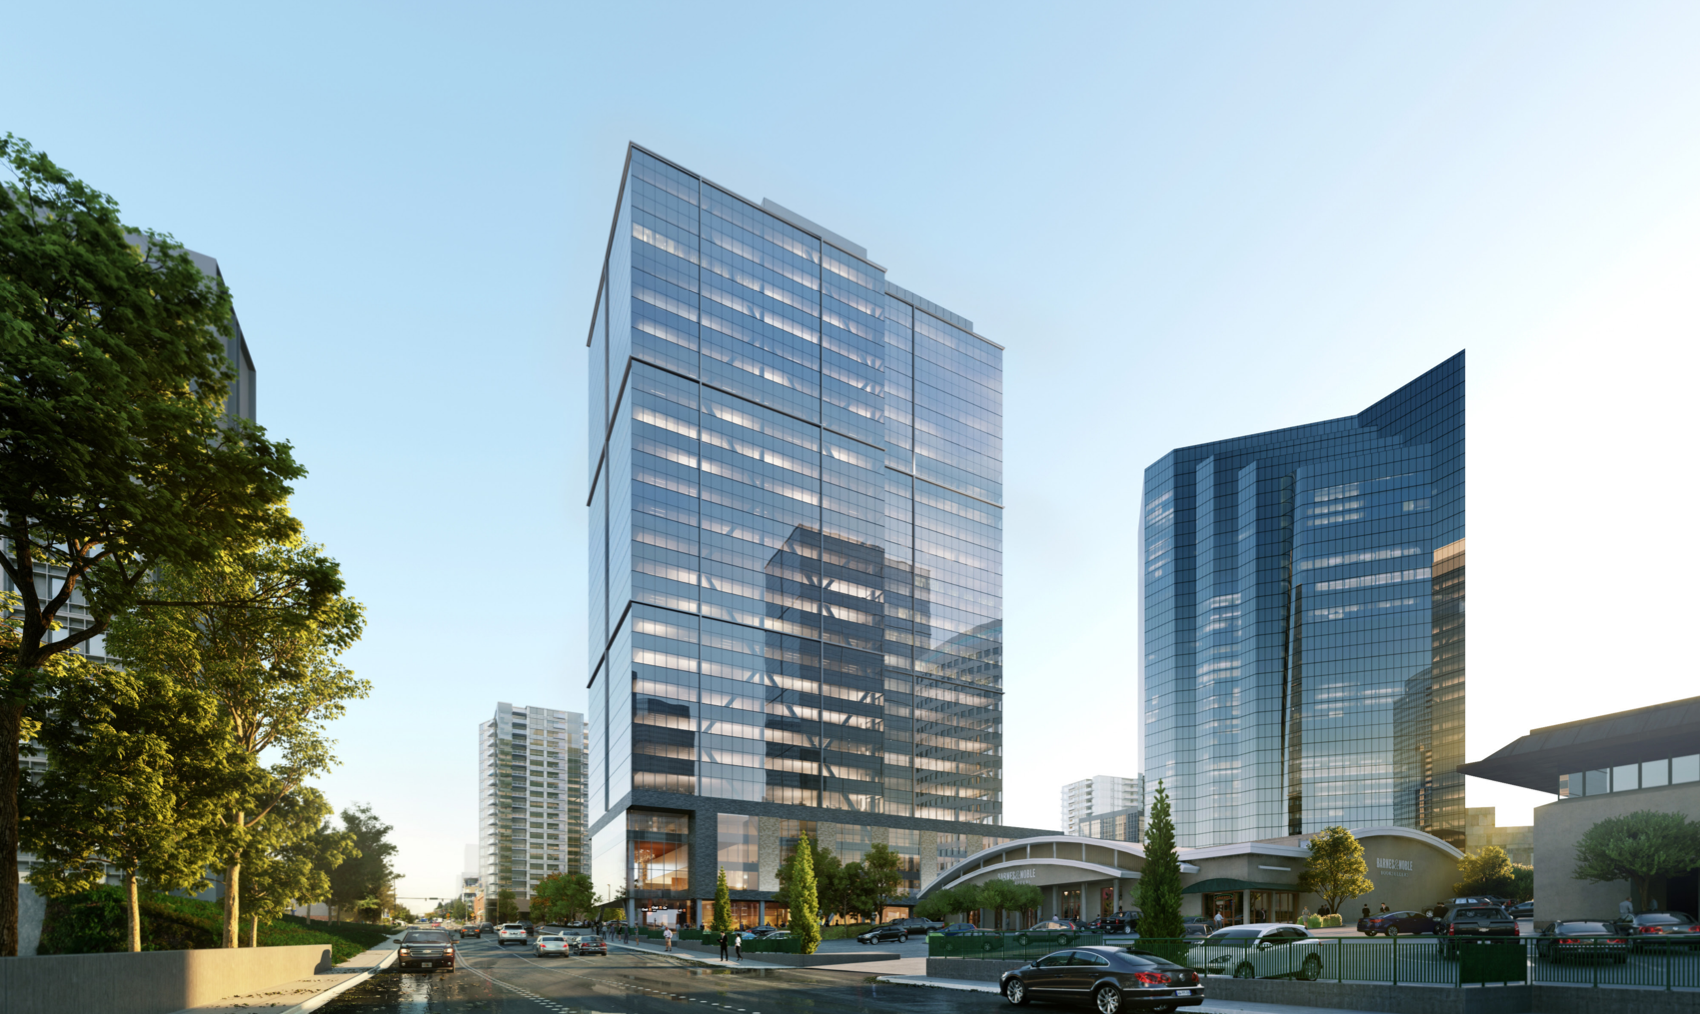 Amazon Announces Pause on 6 Bellevue Towers to Rethink Workspace Design